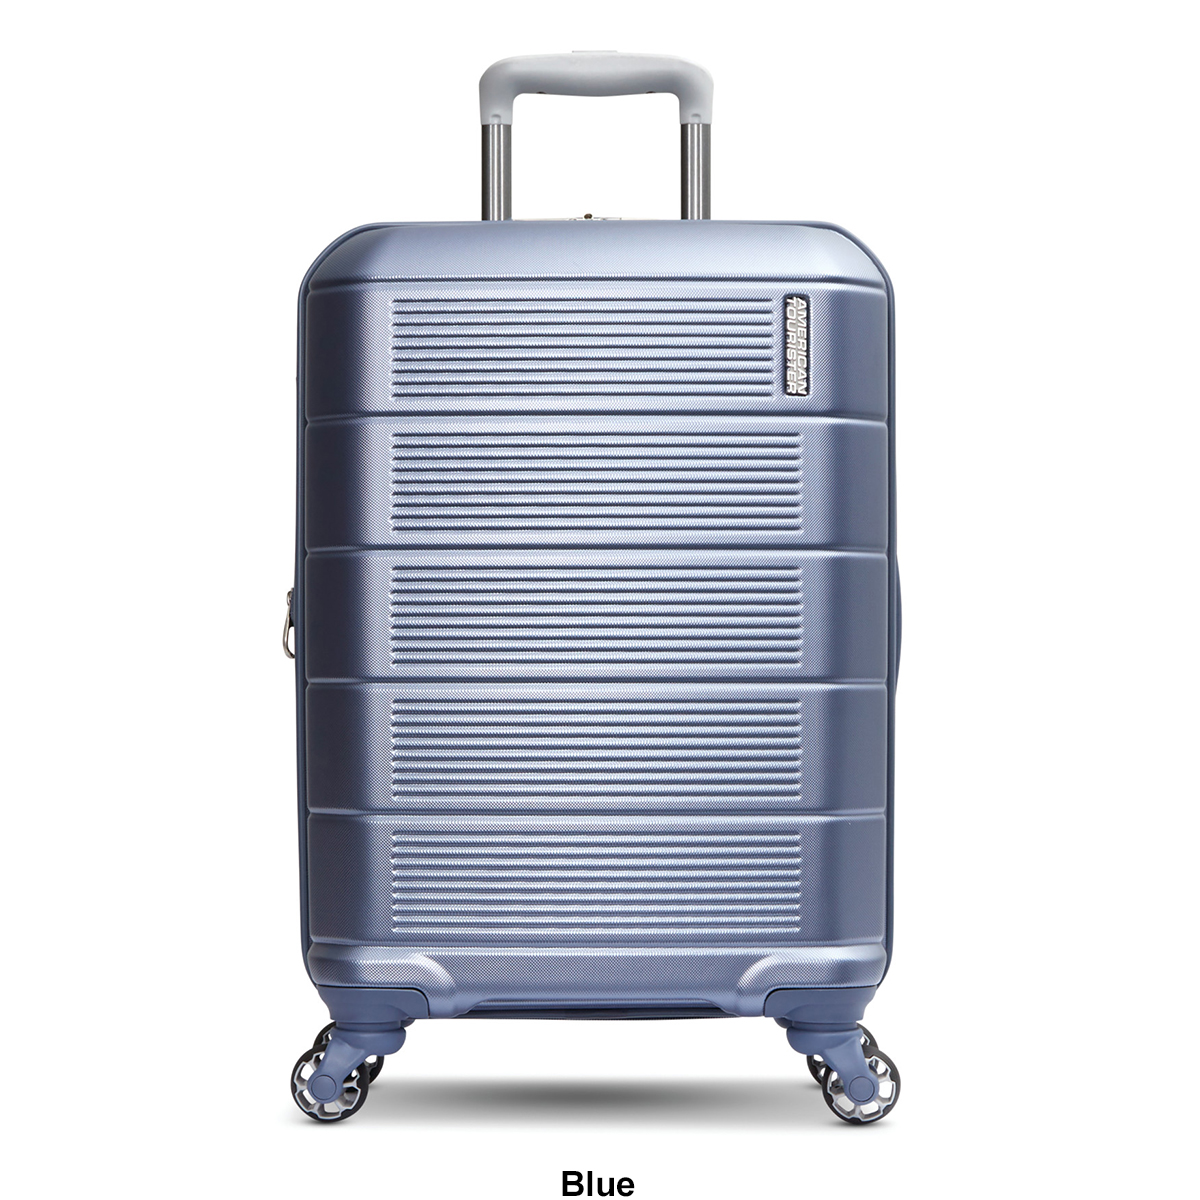 American Tourister(R) Stratum 2.0 Carry-On 20in. Hardside Spinner